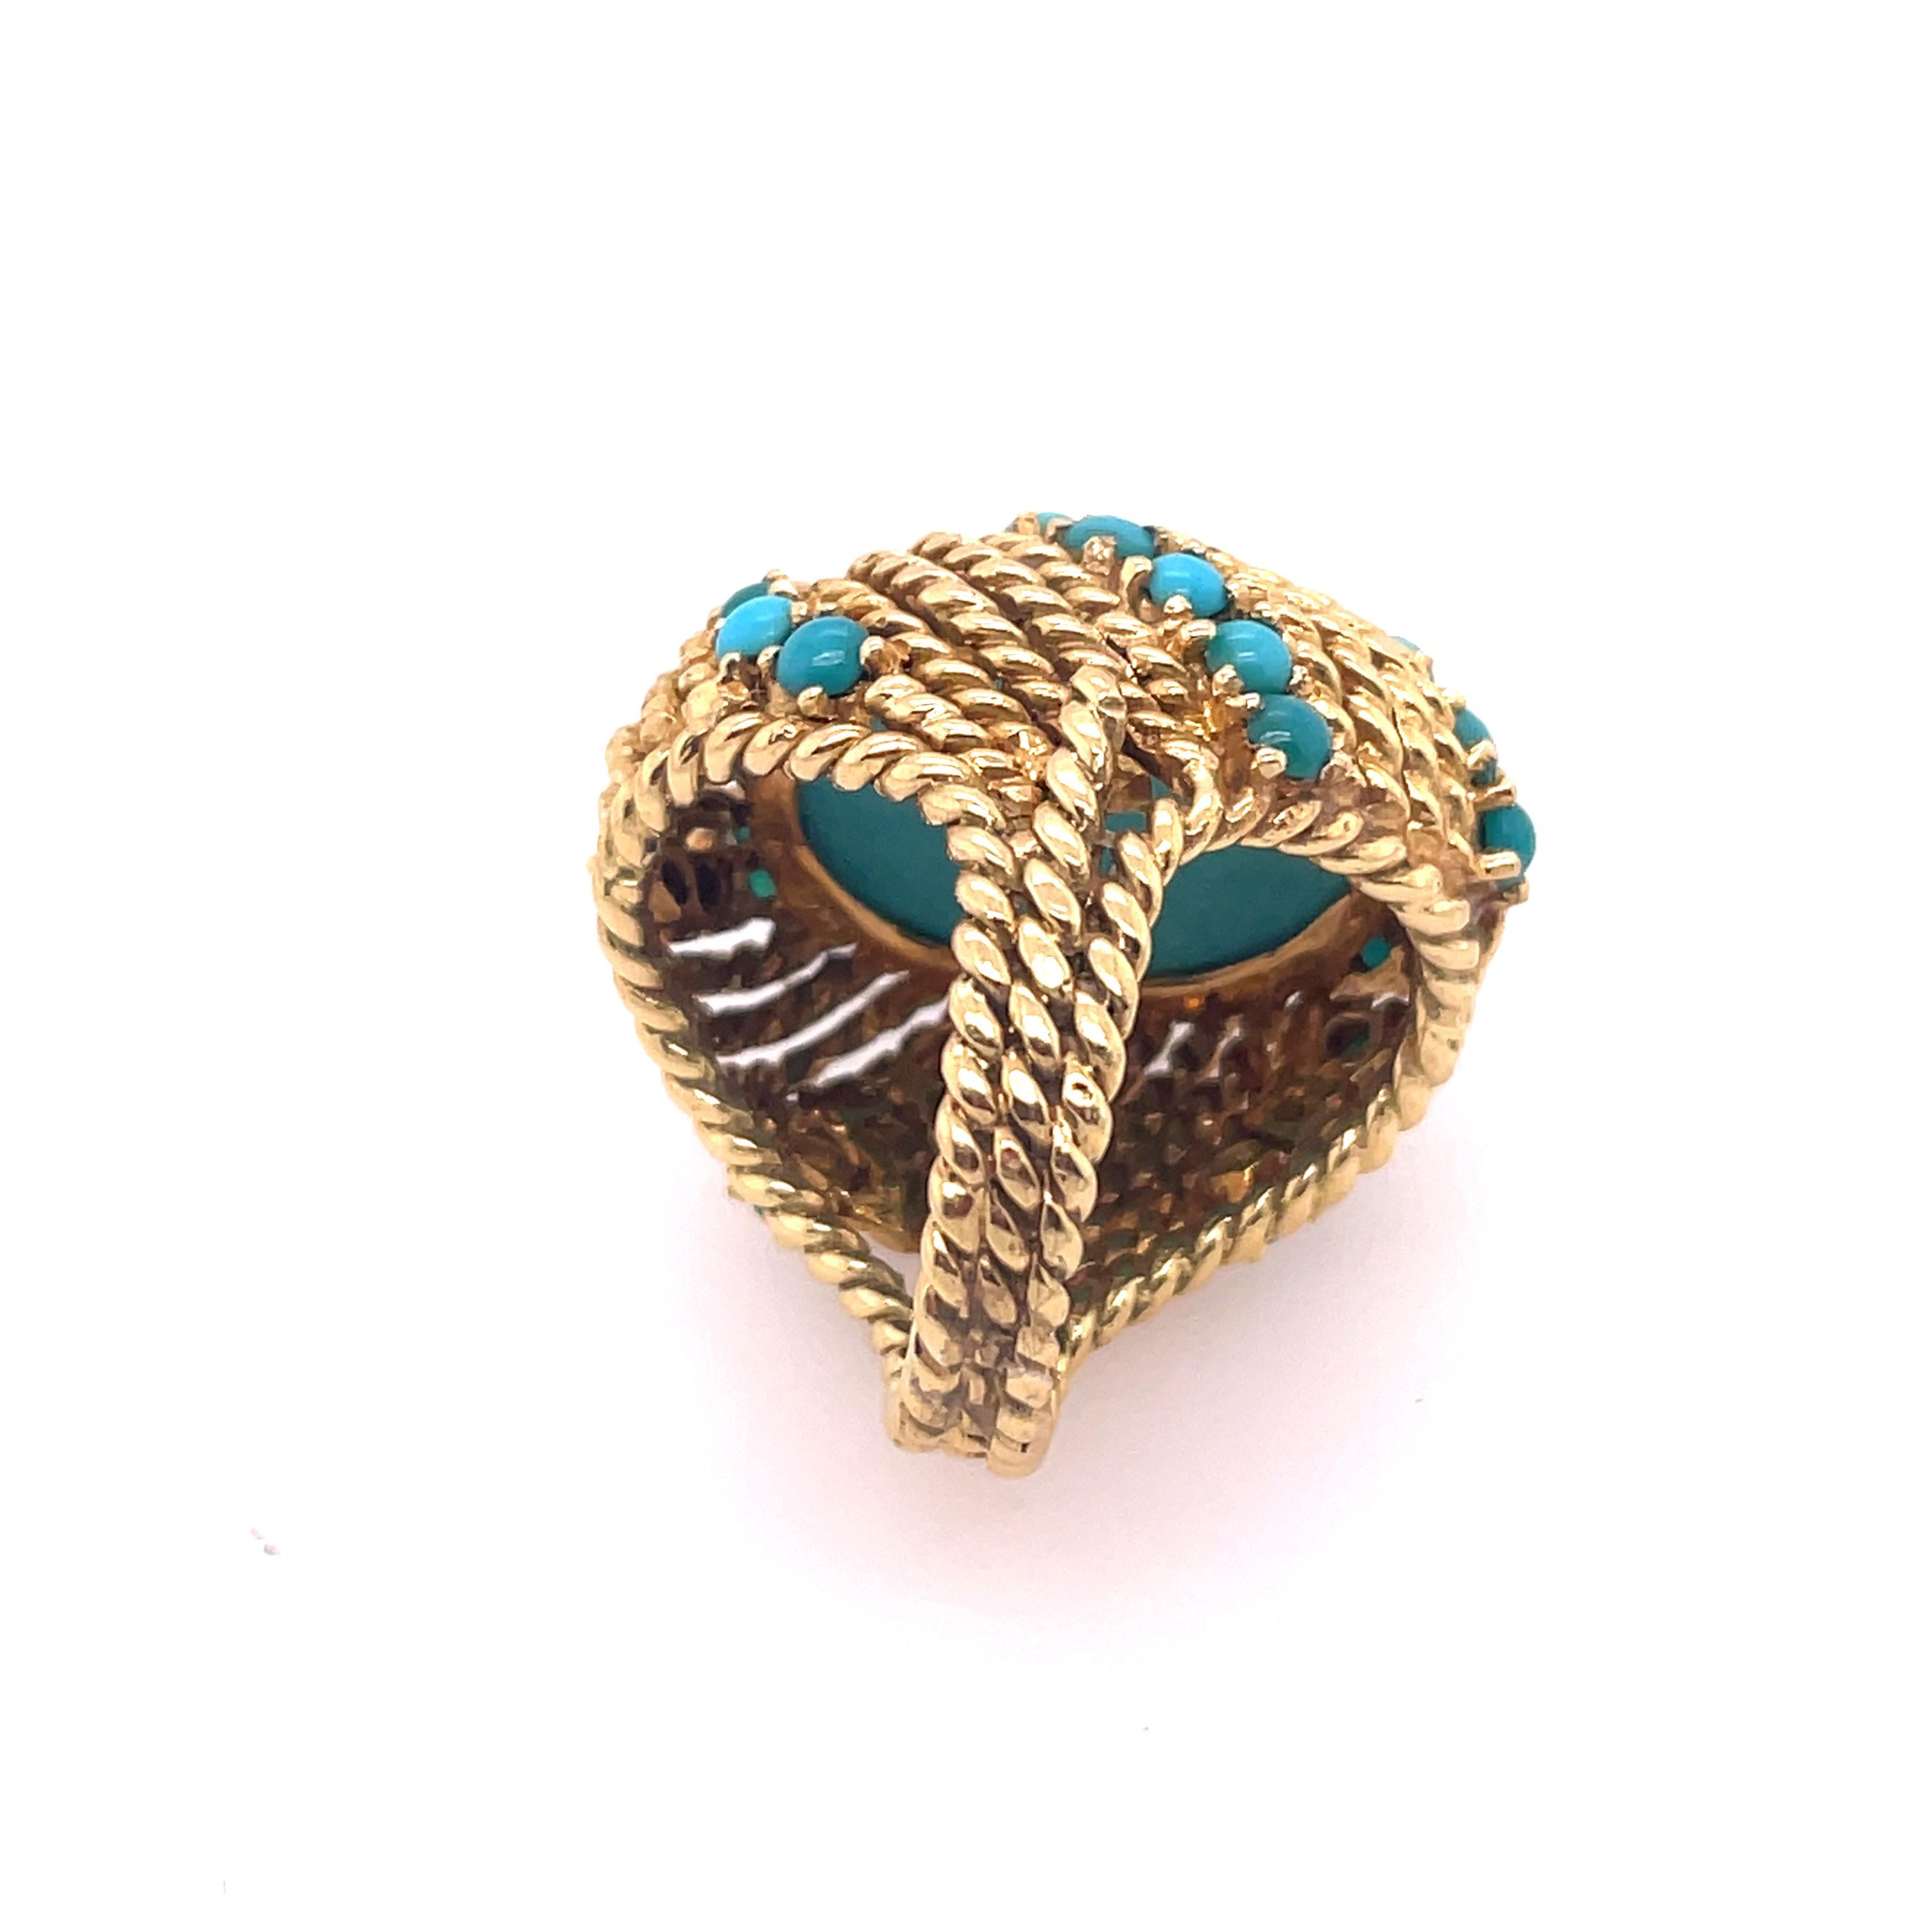 Vintage 18kt yellow gold ring with beautiful uniform medium slightly greenish turquoise blue stone with good luster. Braided gold accents and band.



1 1/8 x 7/8 inches.
